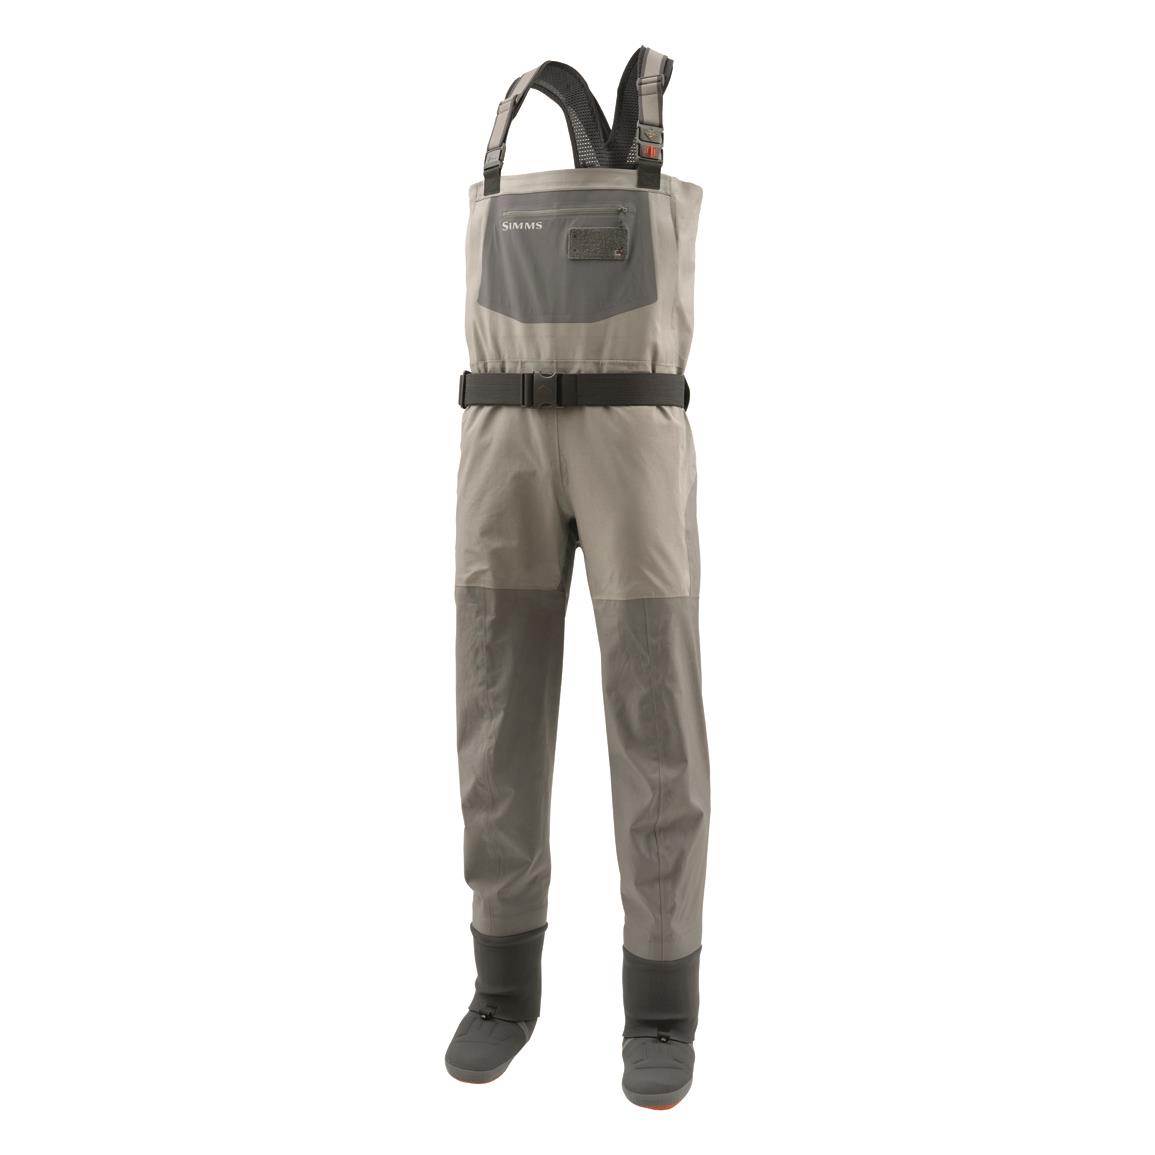 Simms Men's G4 Pro Breathable Stockingfoot Chest Waders, GORE-TEX, Slate